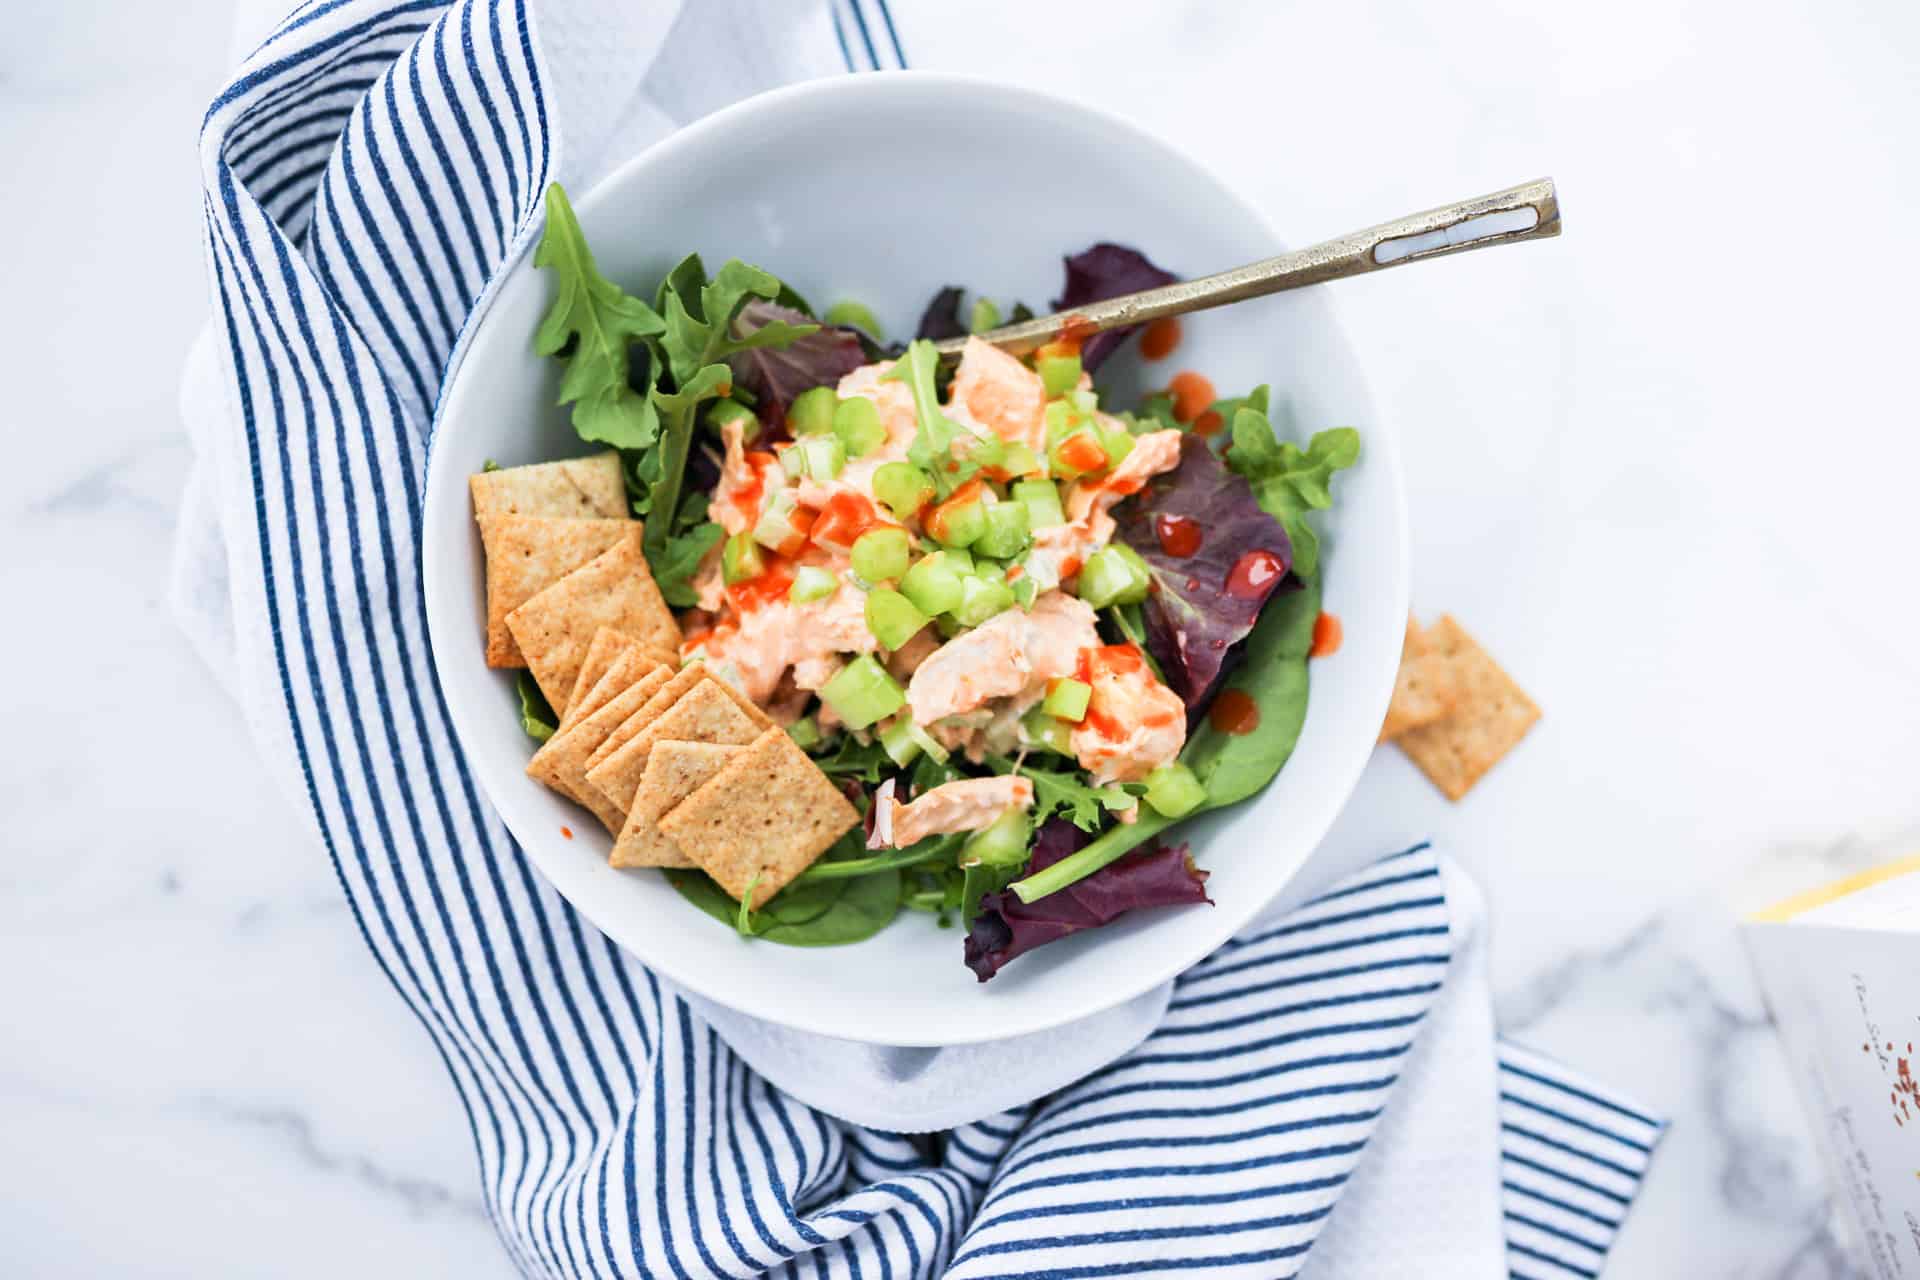 Buffalo chicken salad with crackers